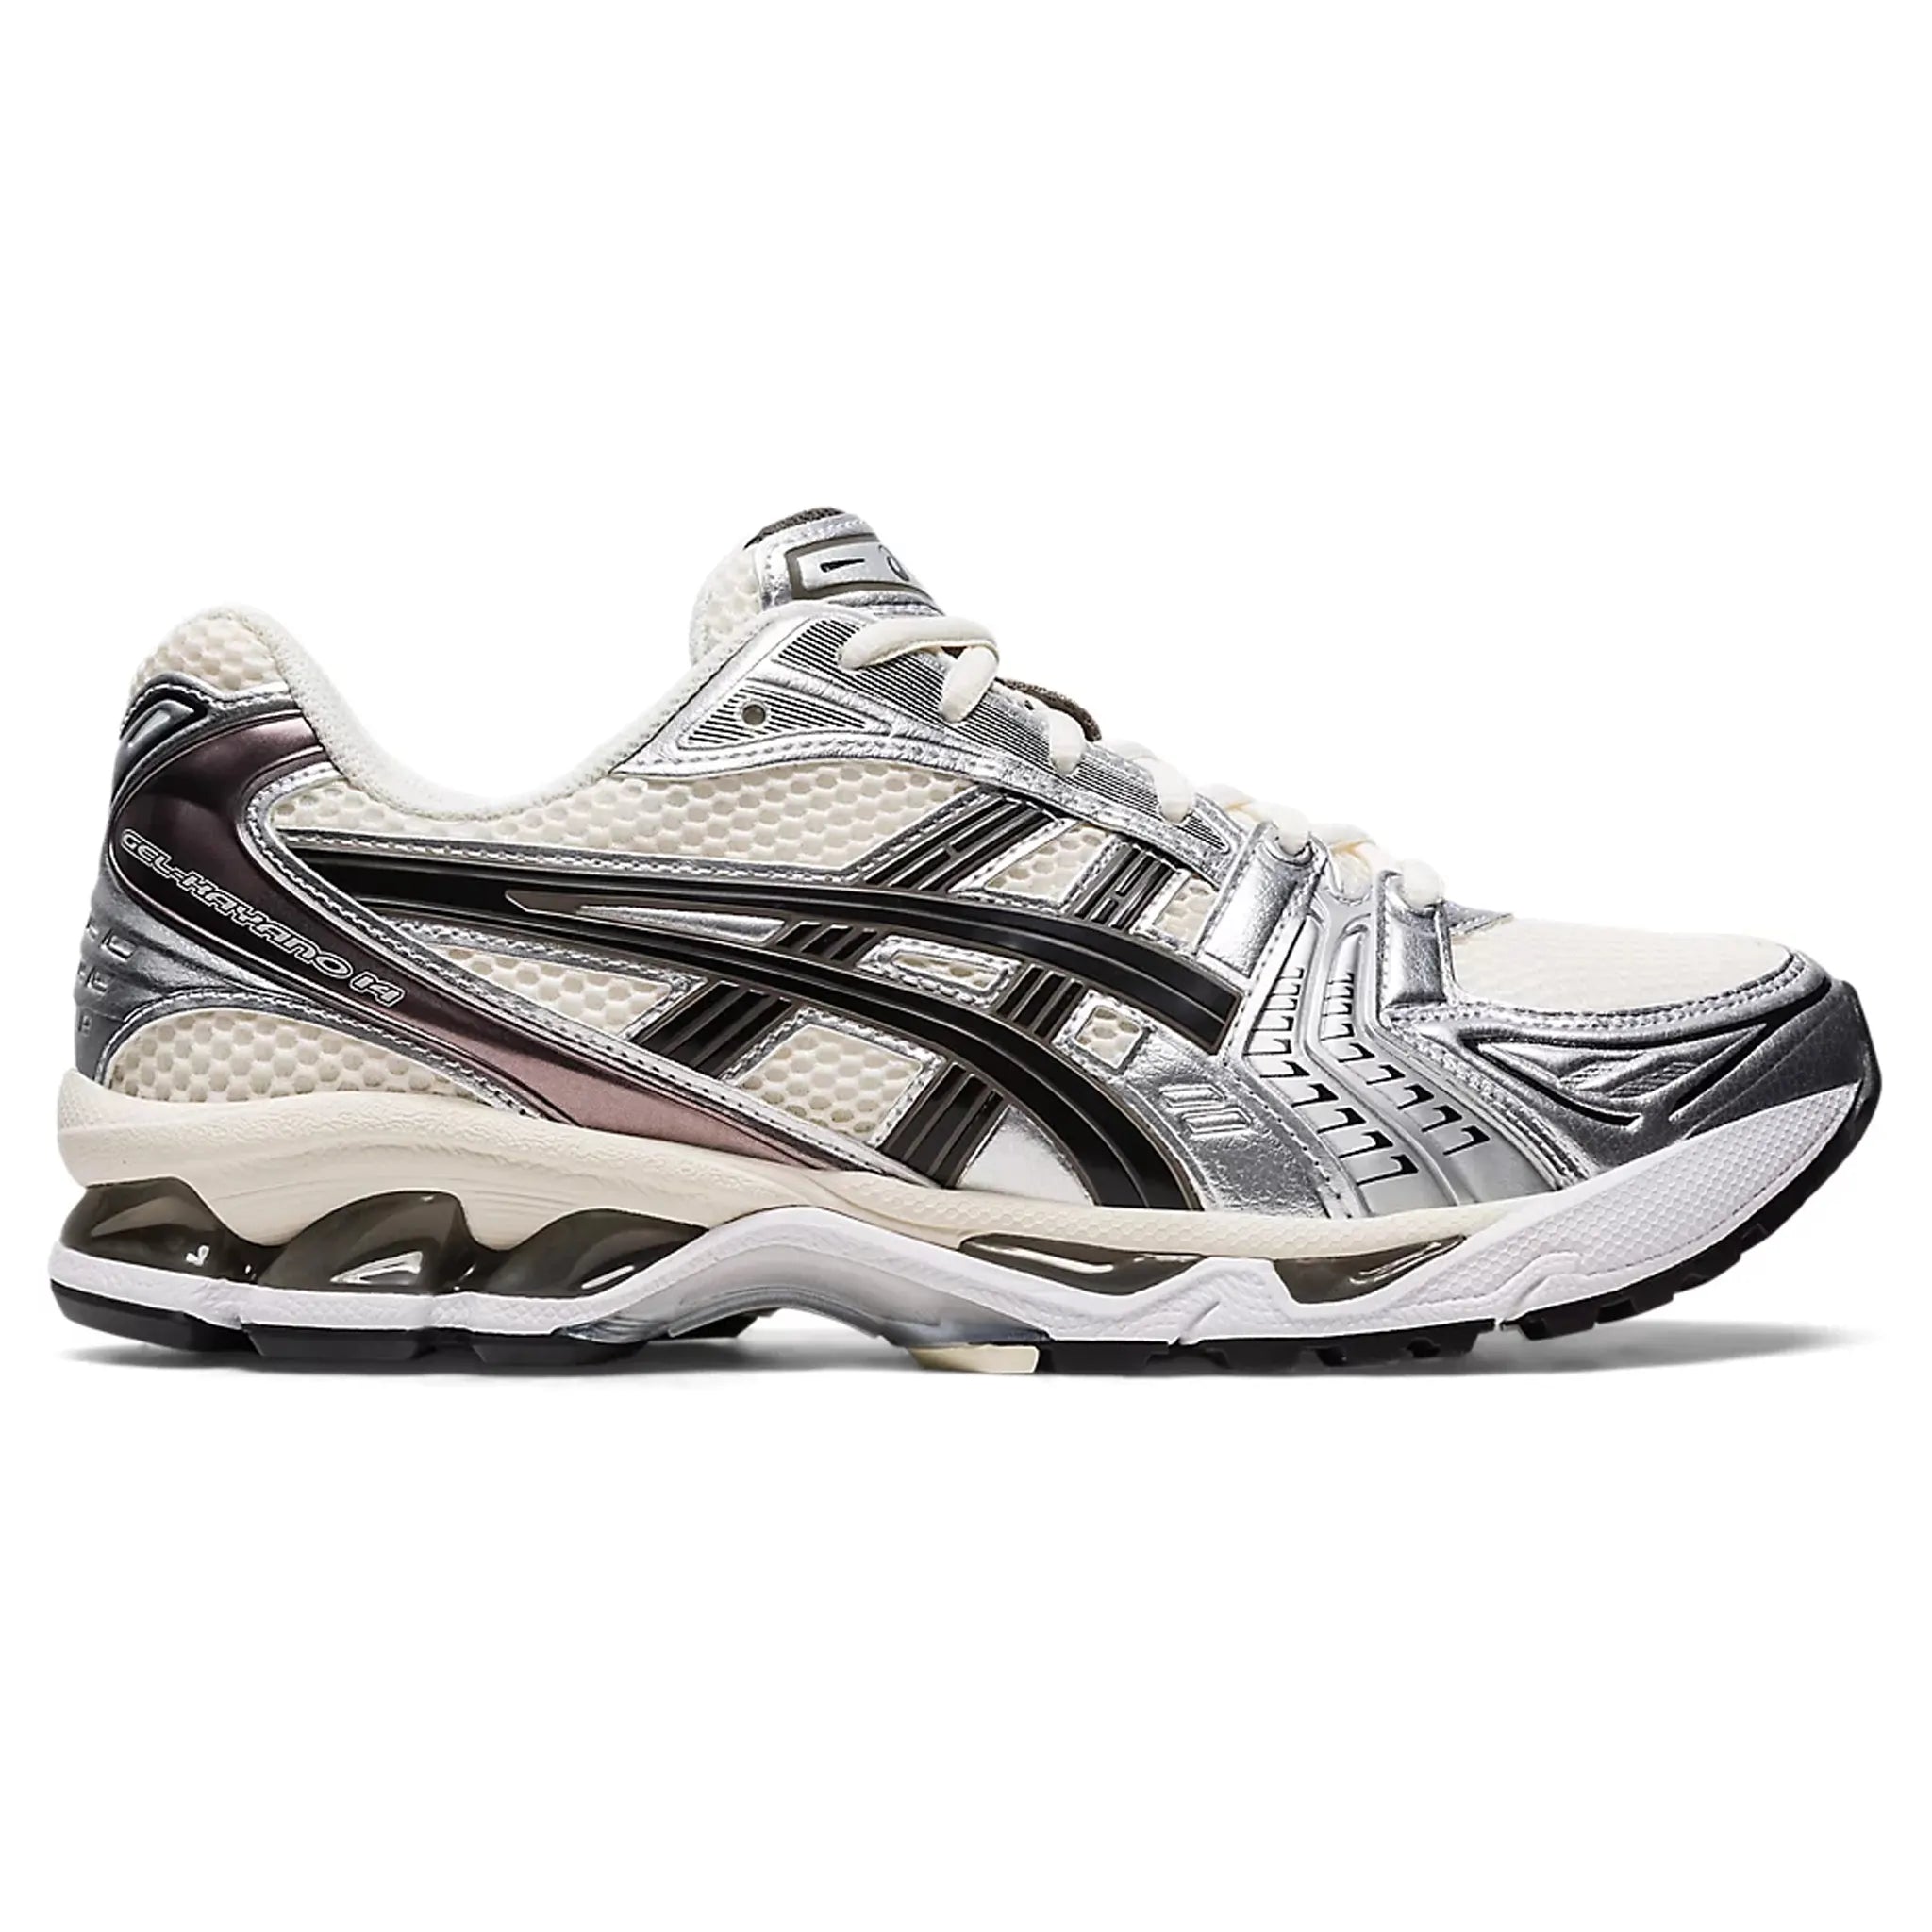 Side view of Asics Gel-Kayano 14 Silver Cream Black (W) 1201A019-108